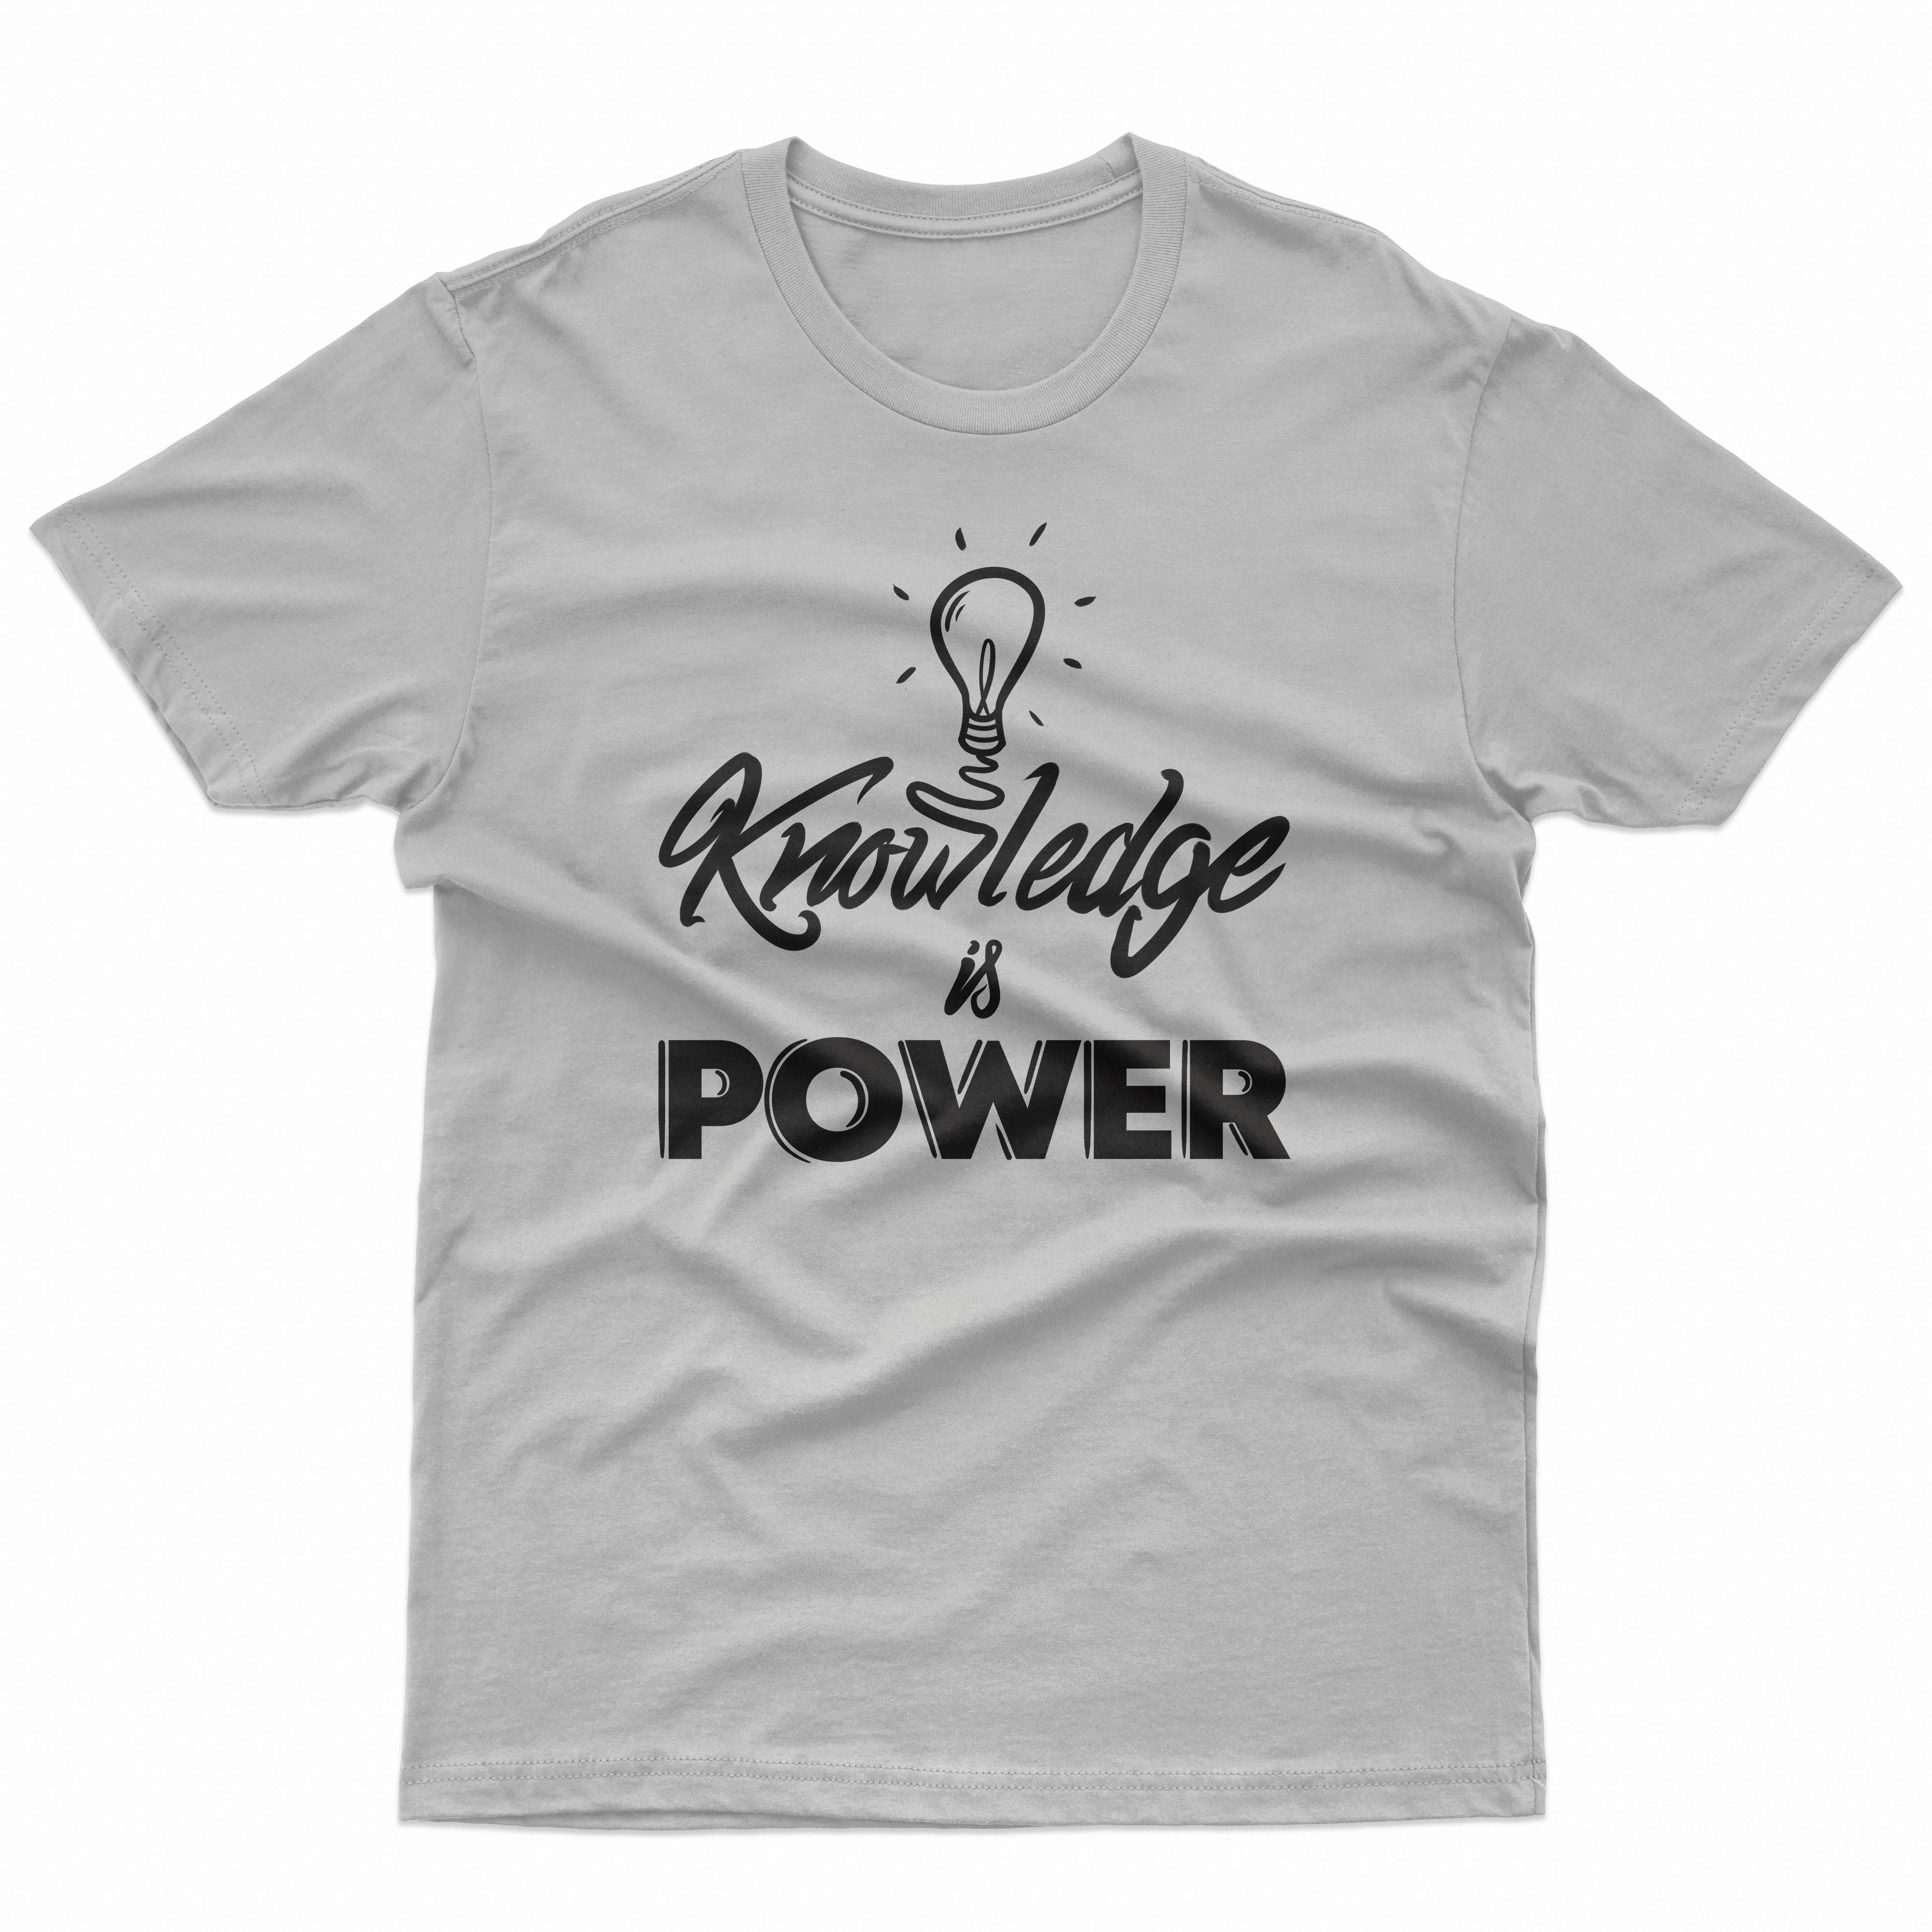 Knowledge is Power Kids T Shirt